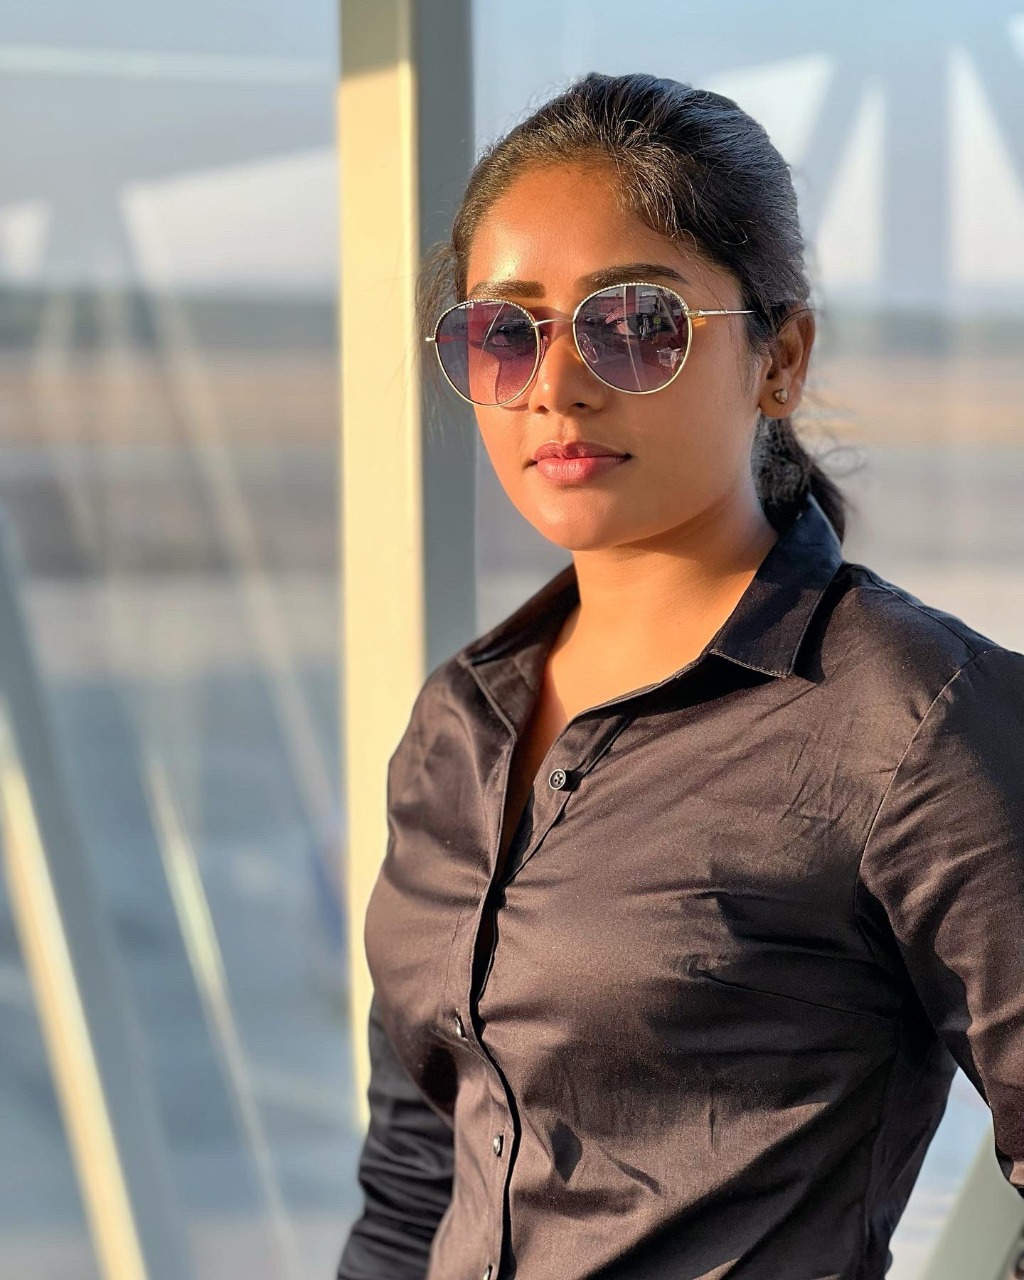 Deepshika signs 5 movies even before her debut film release